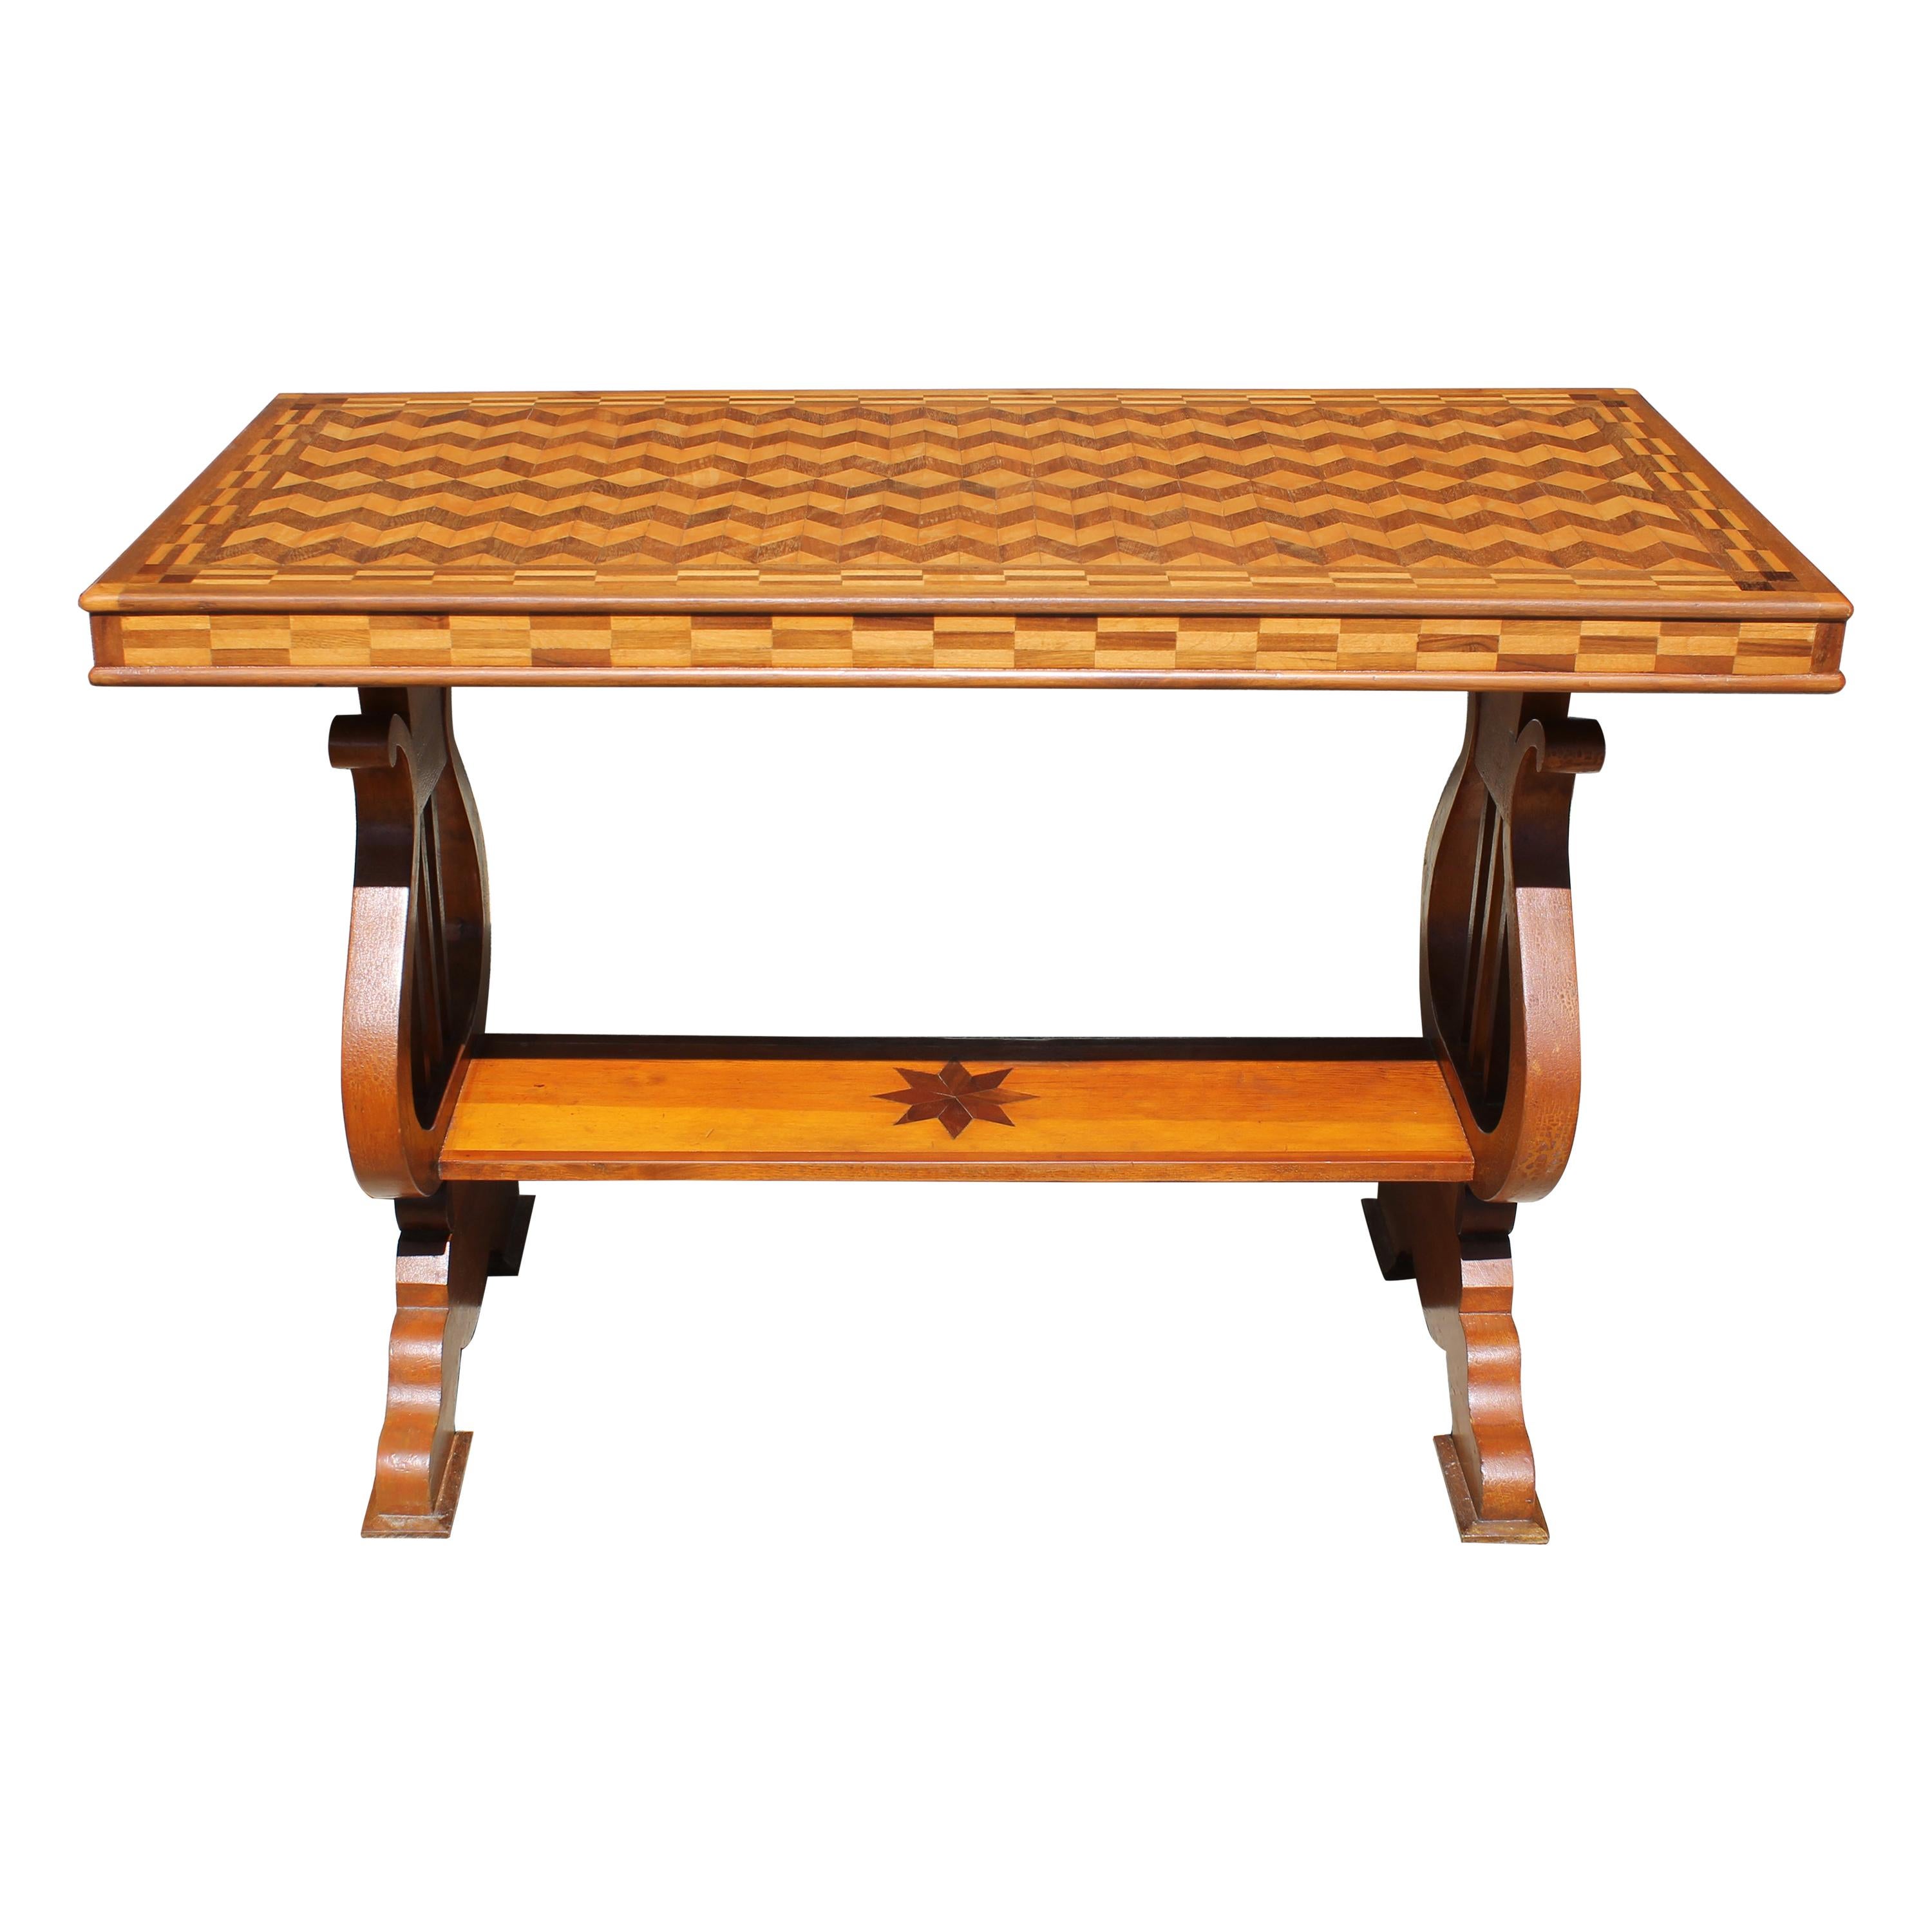 Parquetry Table with Harp/Lyre Supports